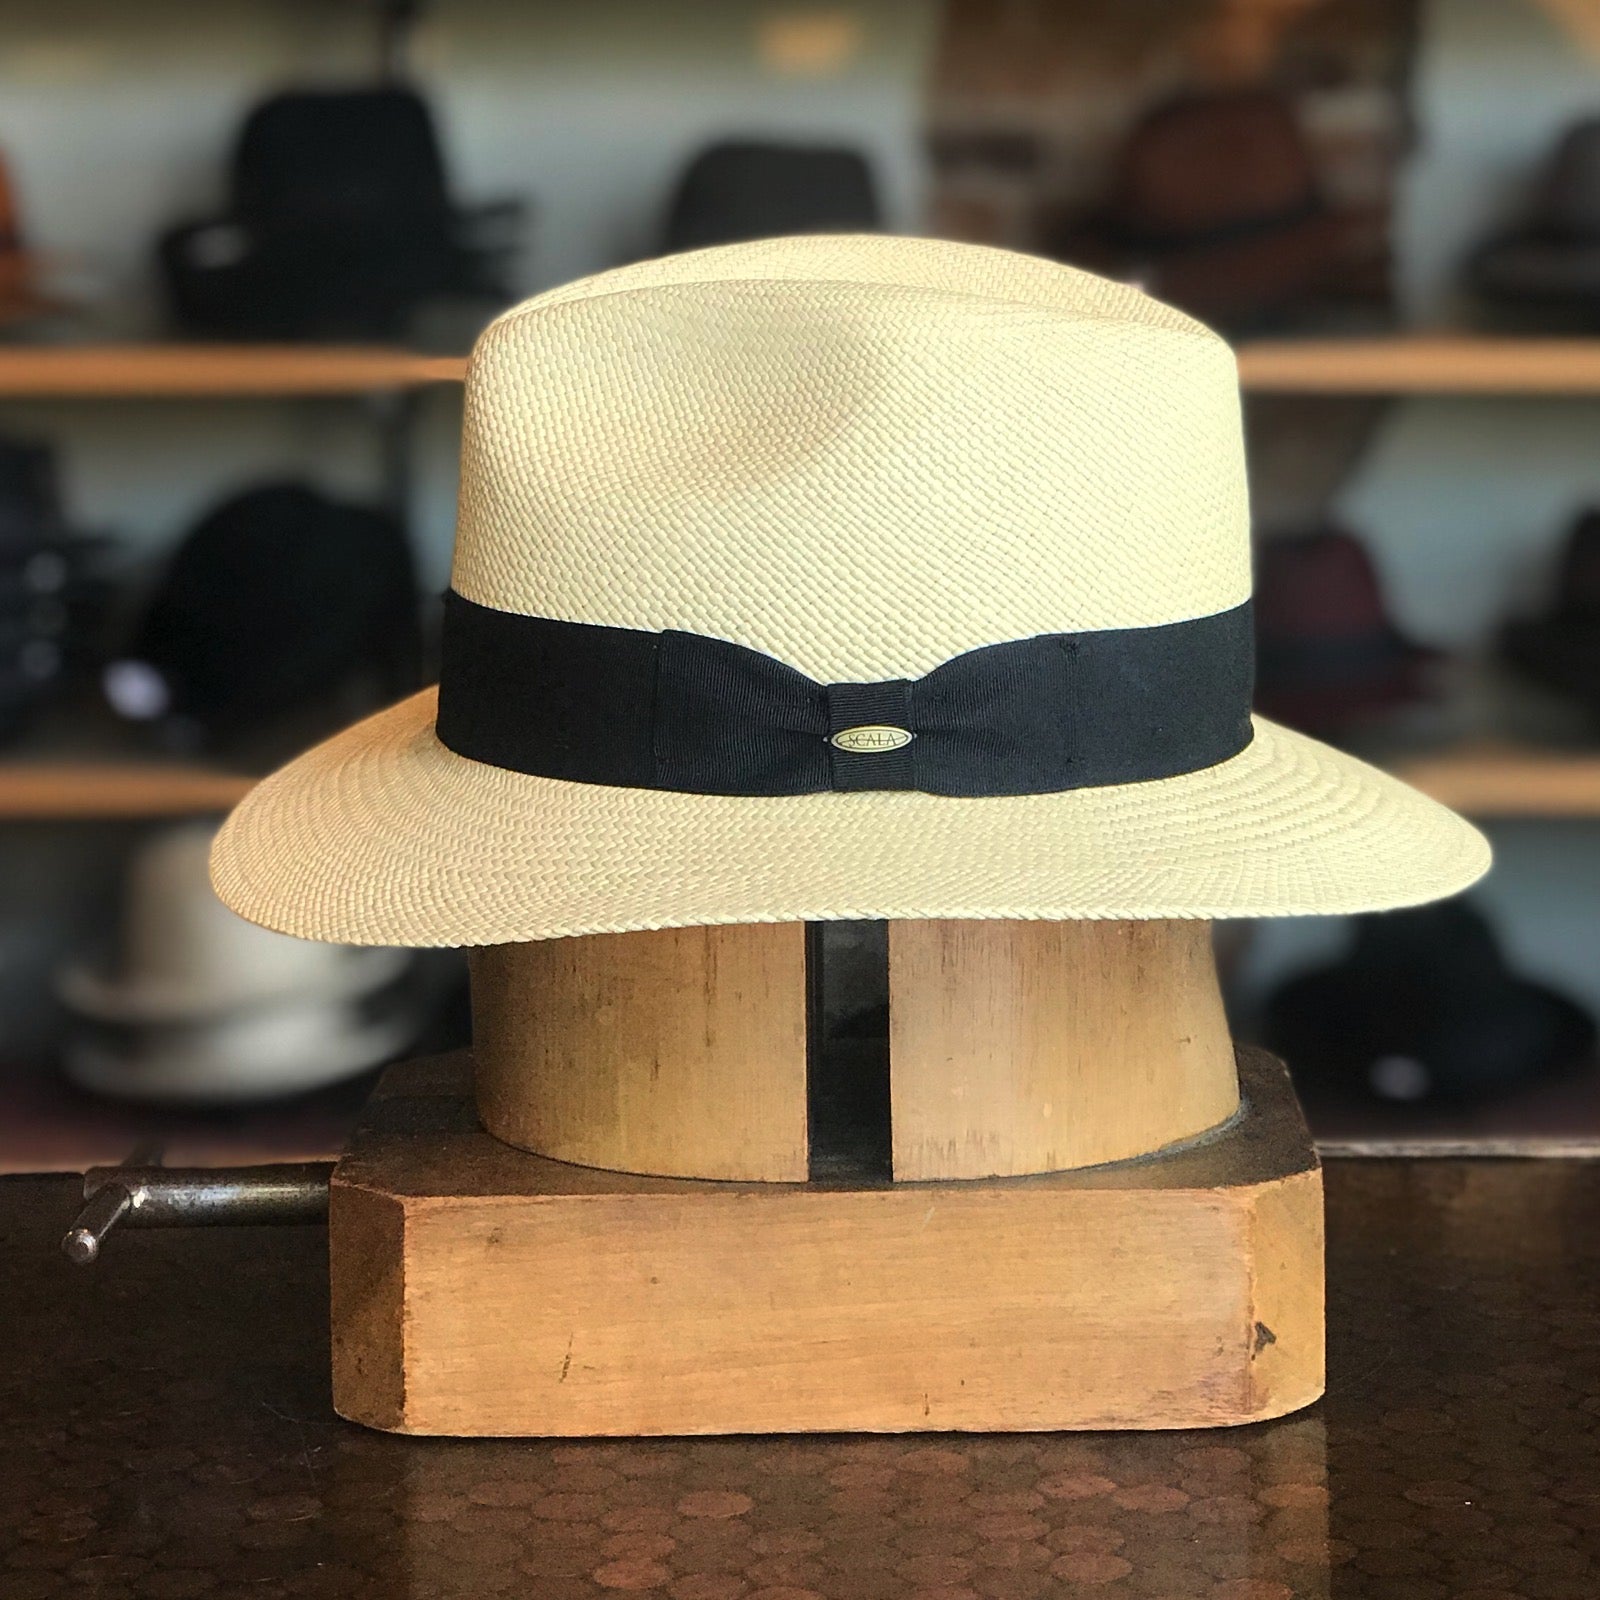 🔥[Time-limited sale]🔥 60% OFF! 🌿Can be rolls up for packing -Handmade Panama Hat-Safari